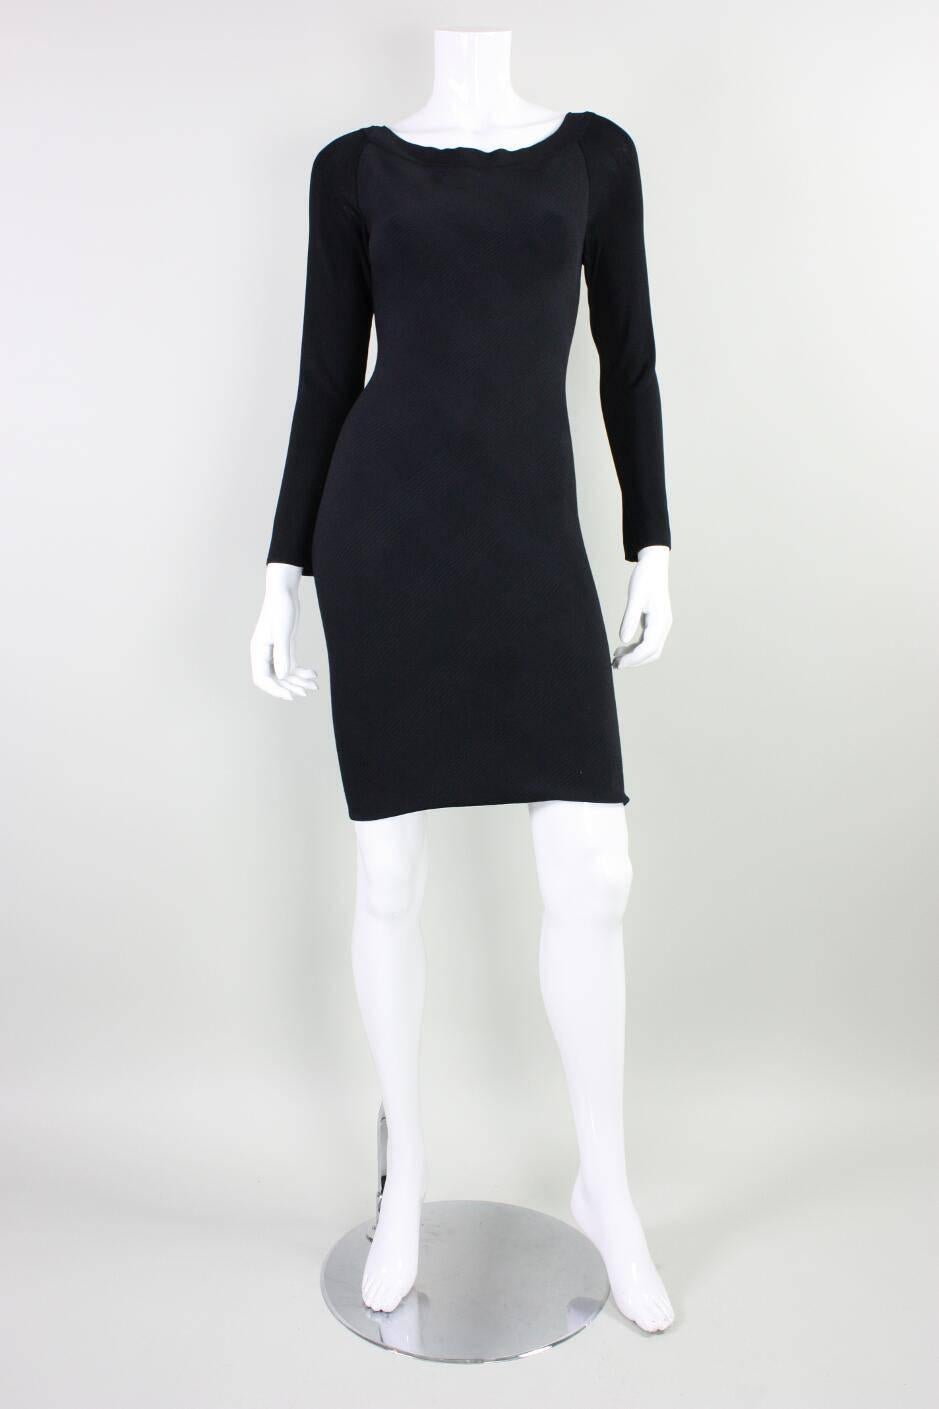 Vintage dress from Herve Leger dates to the 1990's and is made of a body-hugging houndstooth fabric front with plain black sleeves and back.  Boat neck front with v-neck back.  Center back zipper.  Unlined.

Labeled a FR 1, US